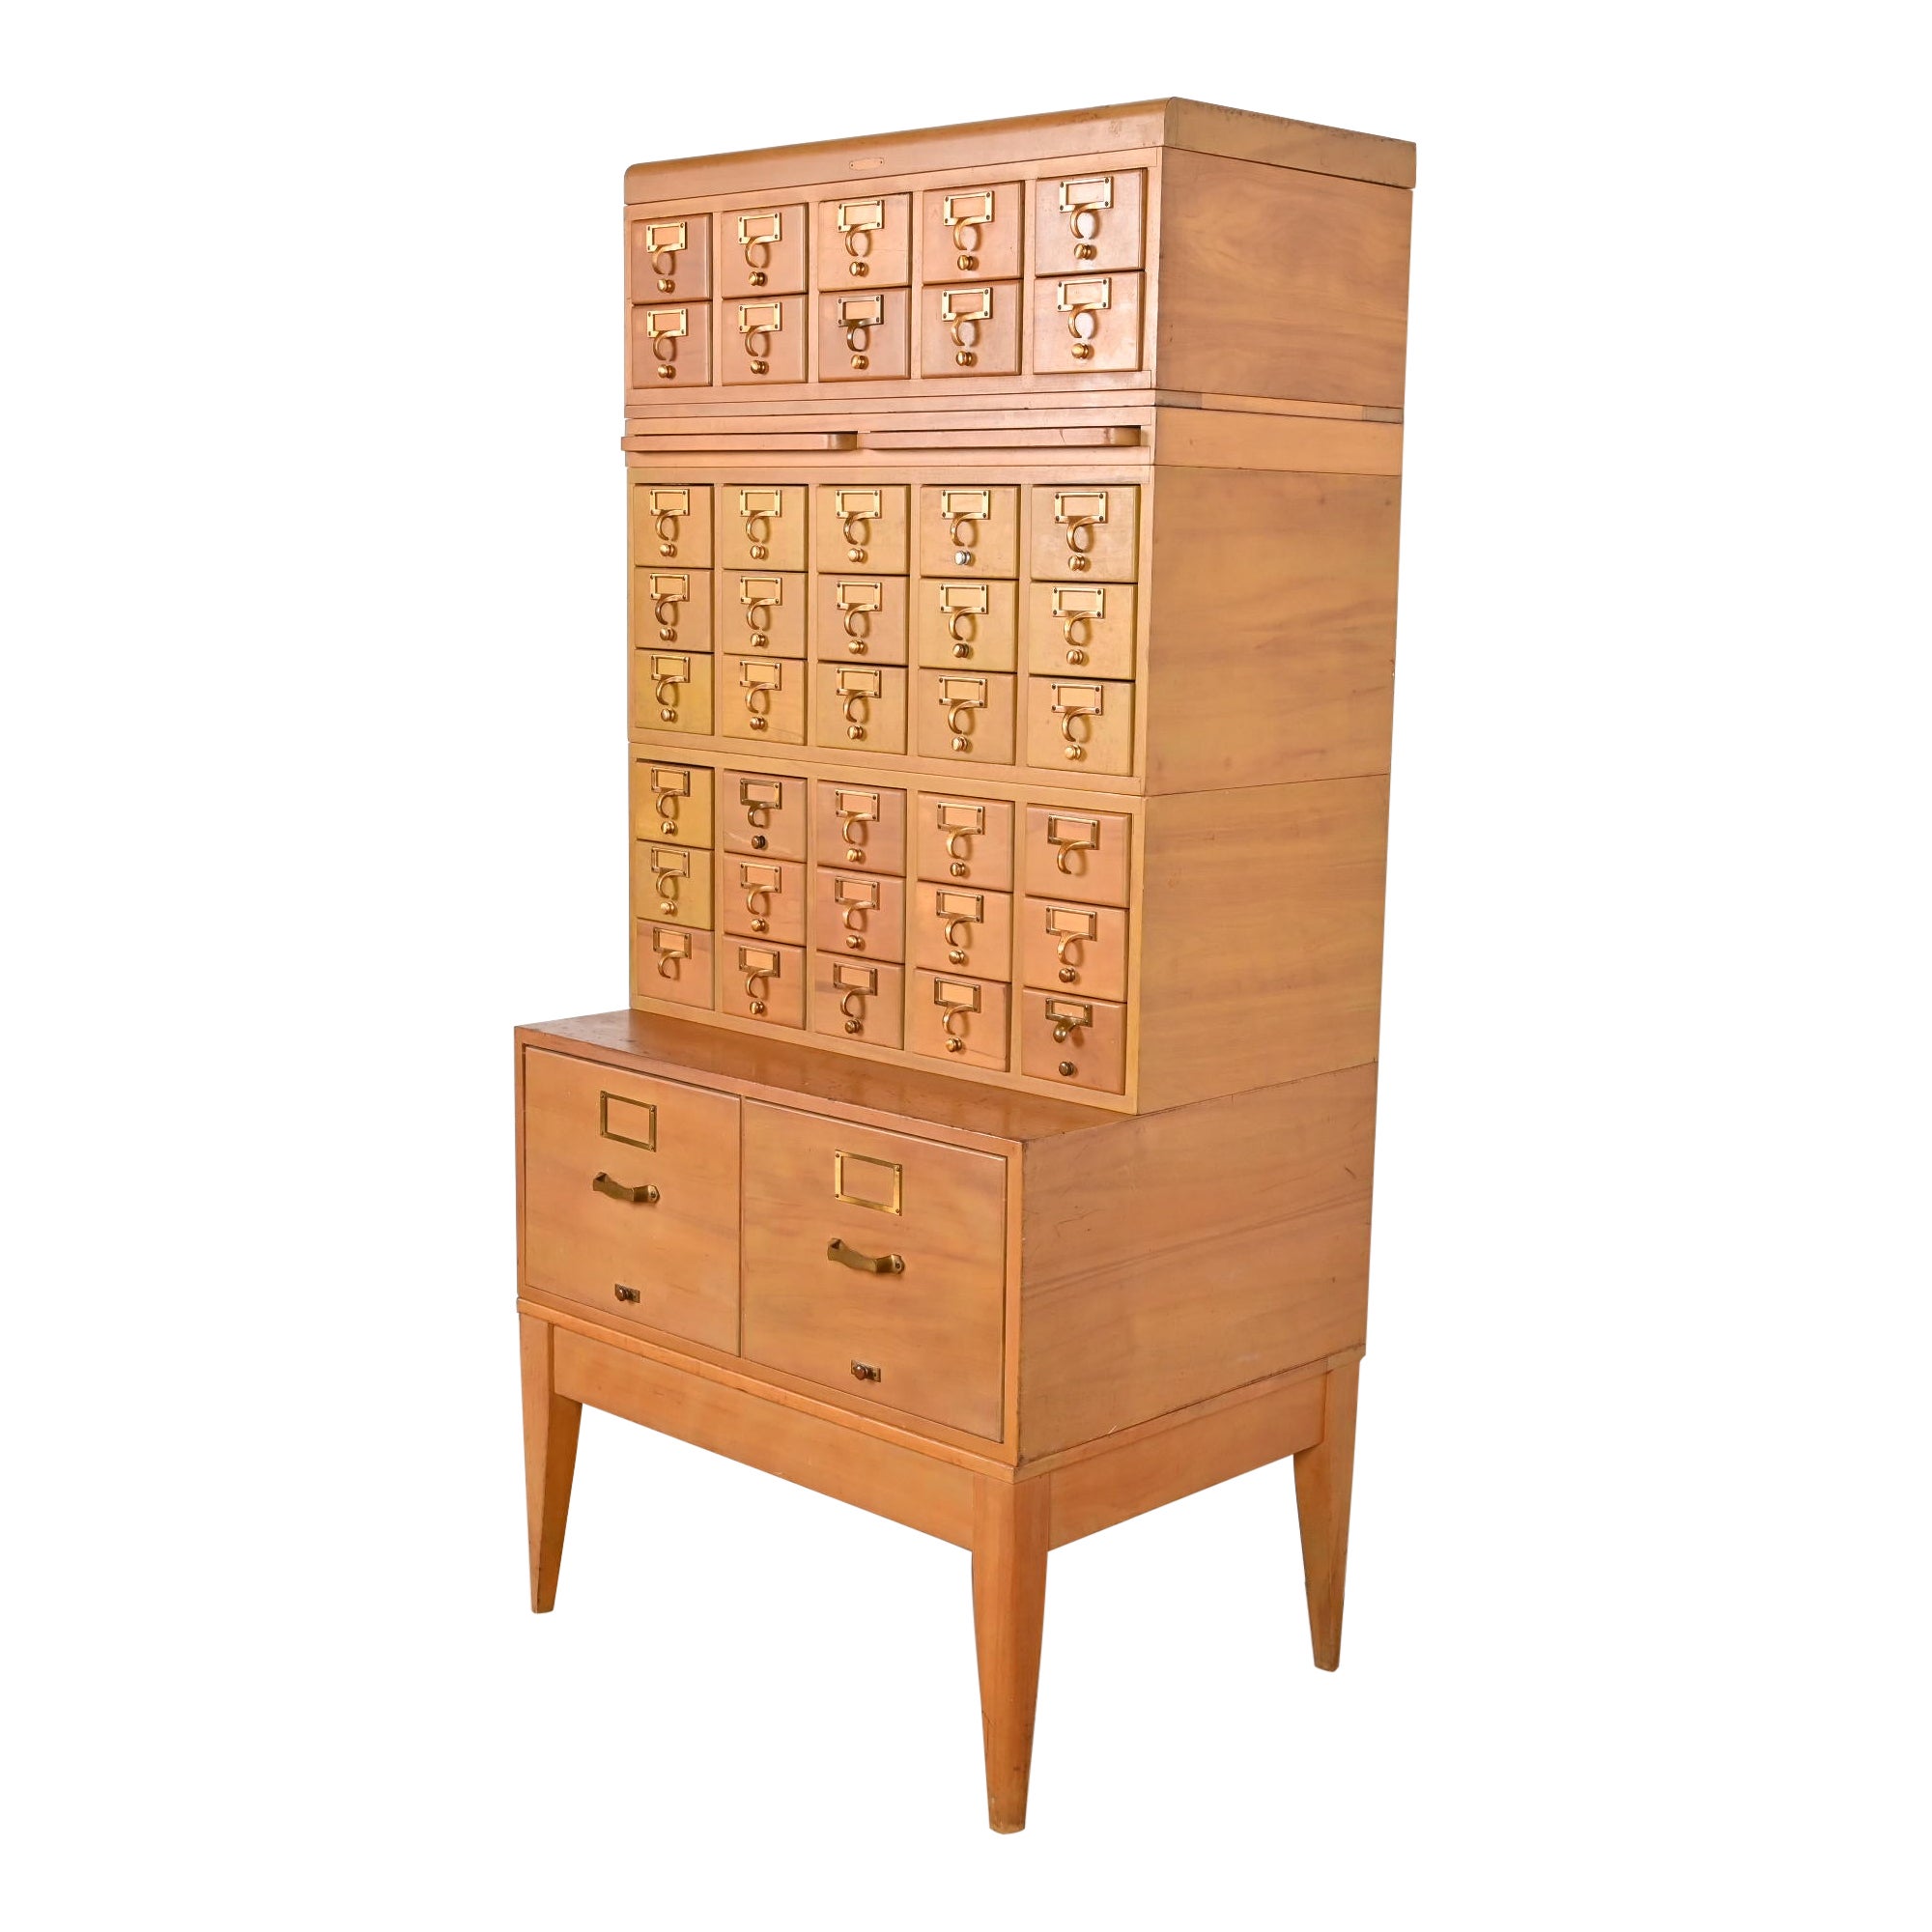 The Moderns Modern Maple 42-Drawer Card Catalog Filing Cabinet by Remington Rand